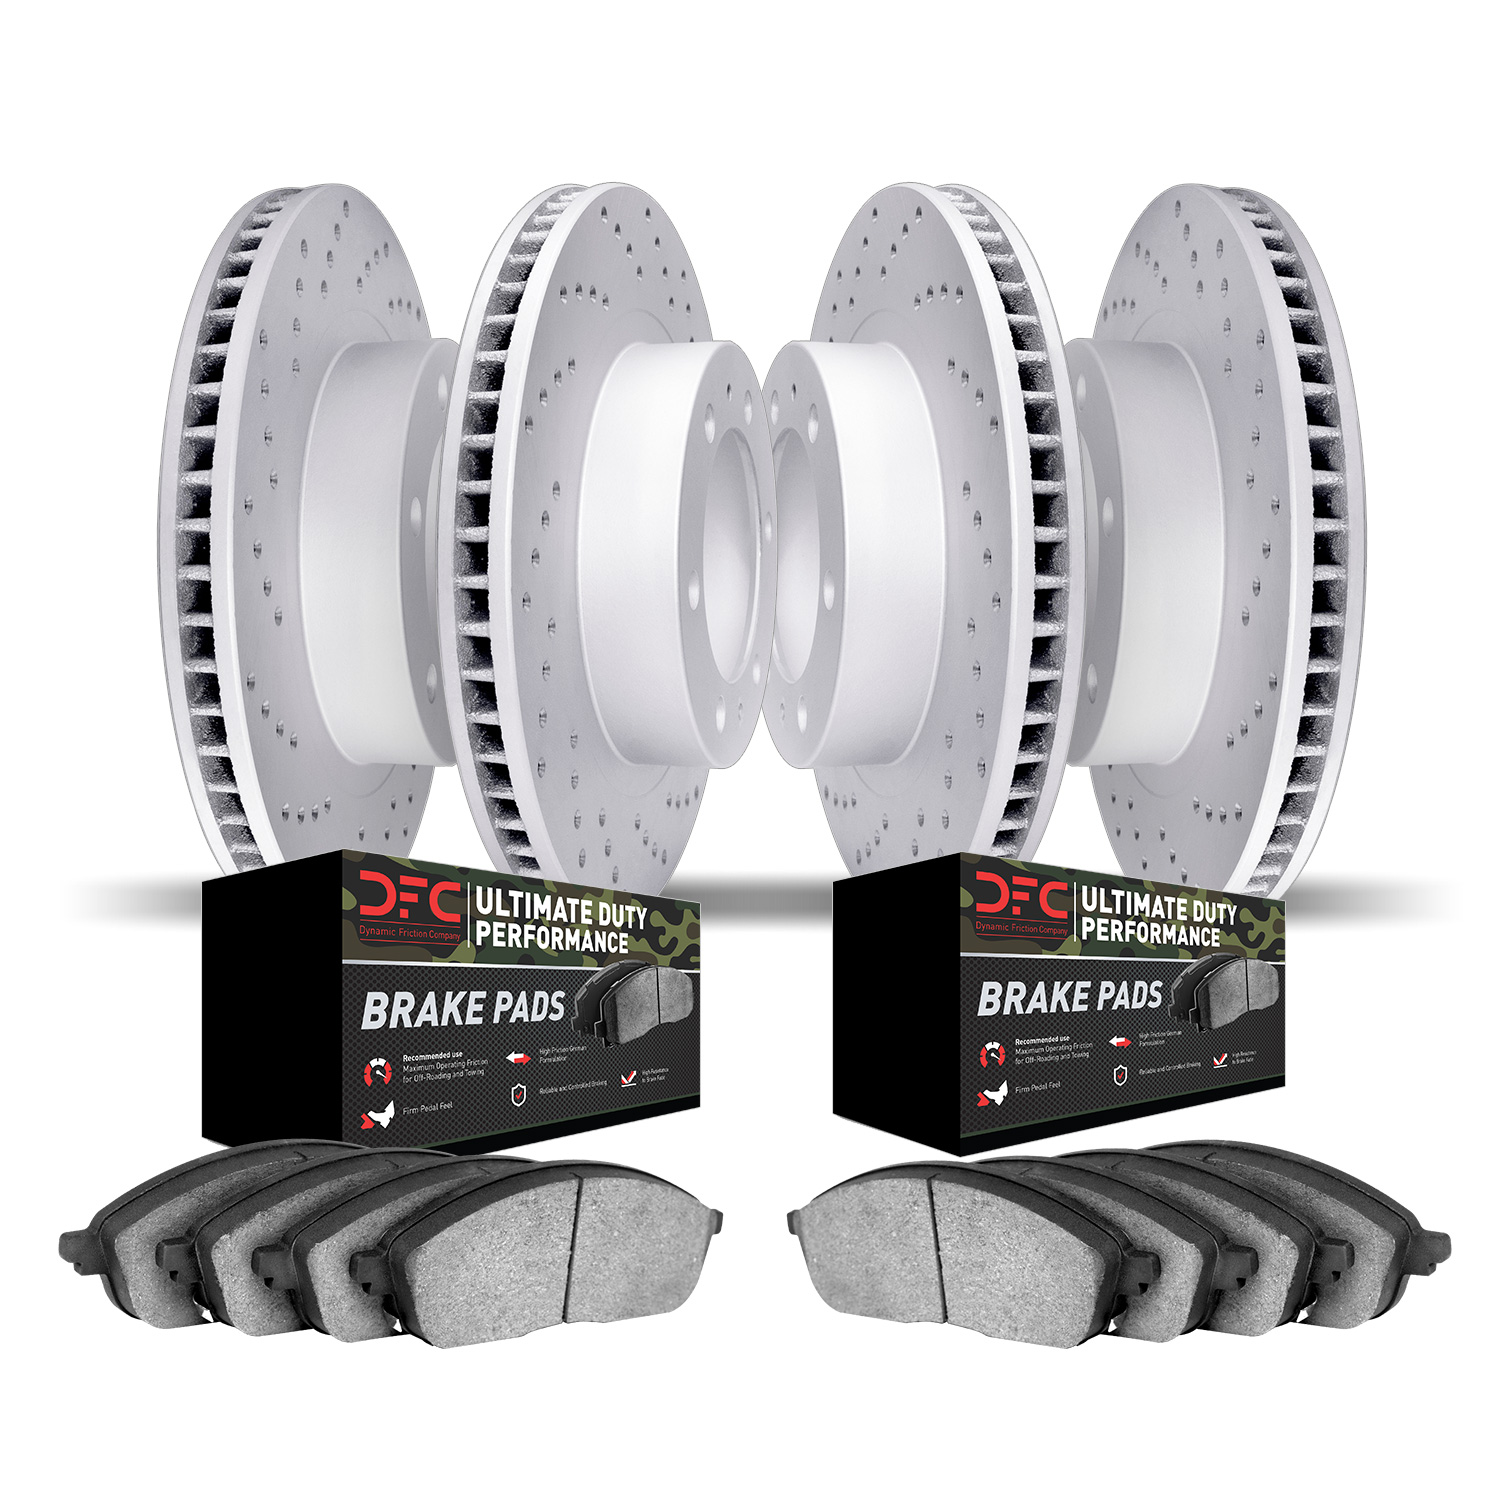 Geoperformance Drilled Brake Rotors with Ultimate-Duty Brake Pads